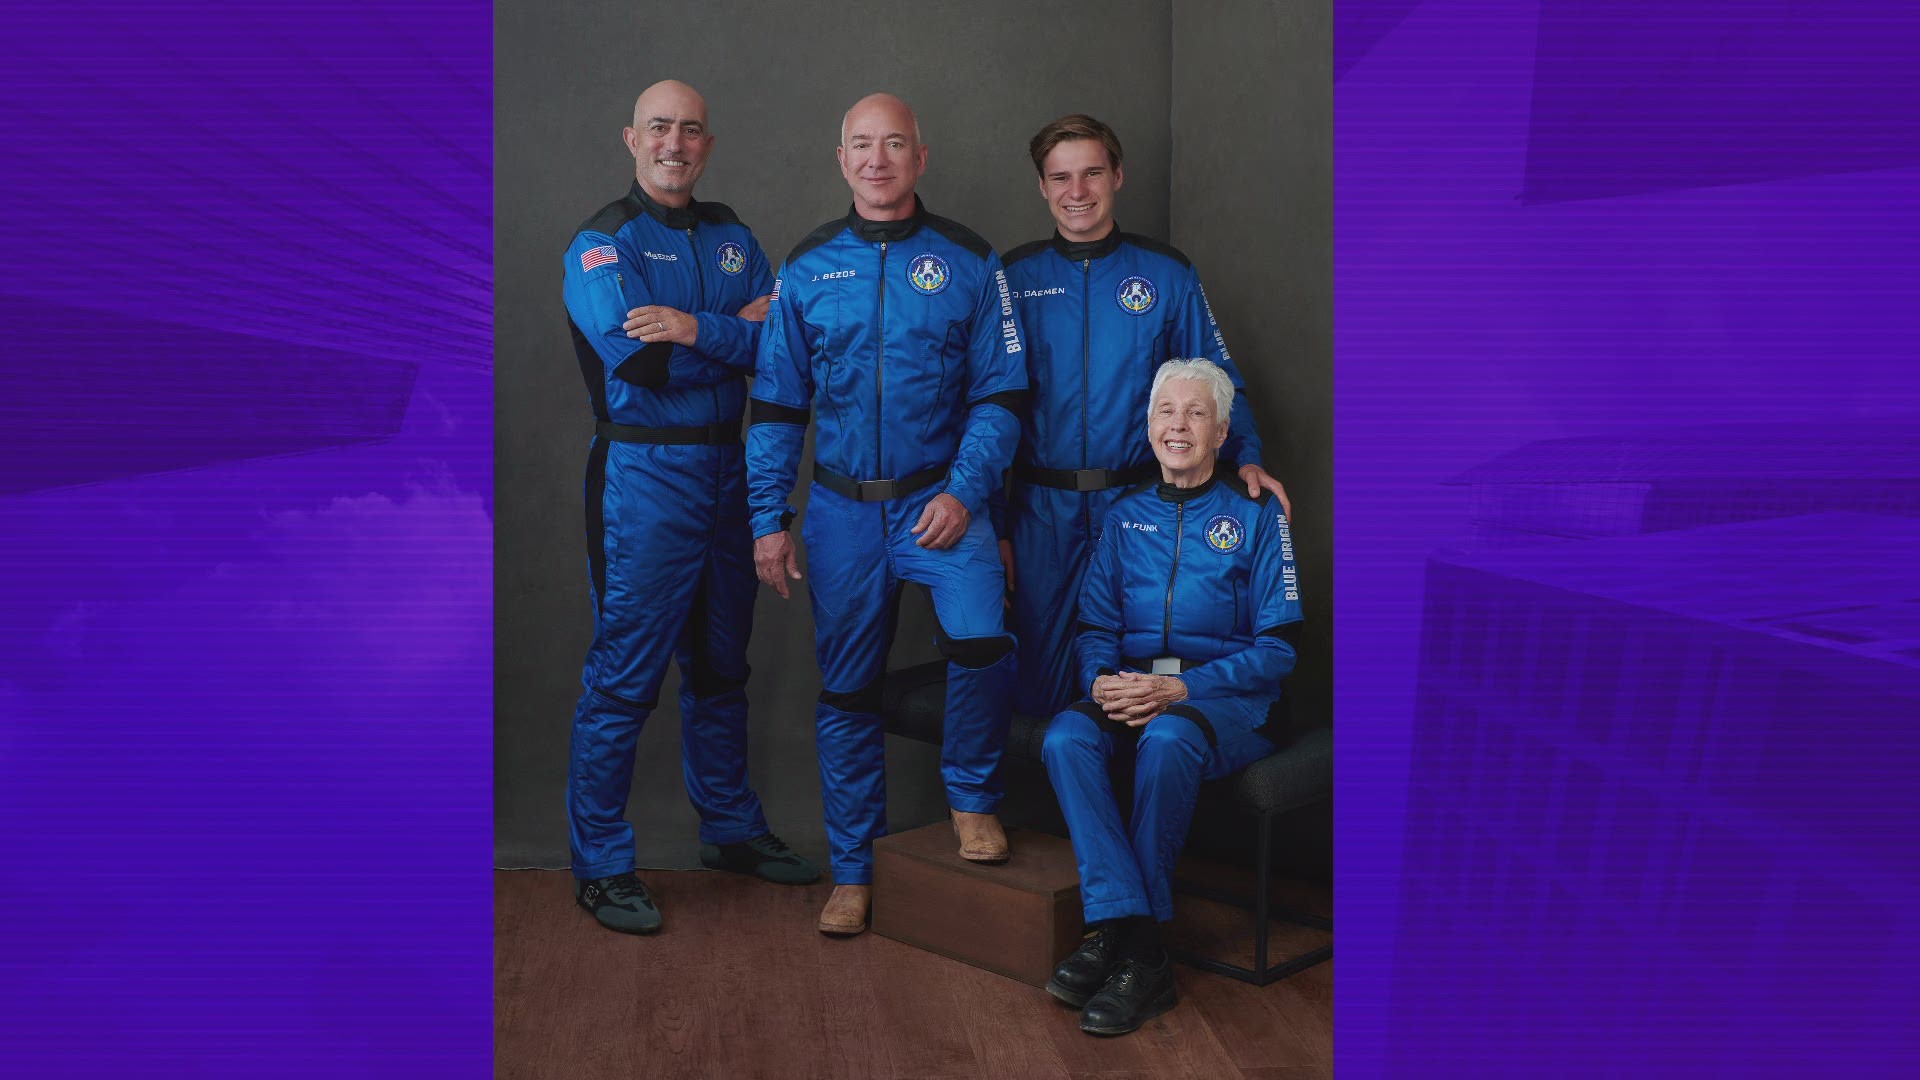 In the 1960s, she wasn't allowed to be an astronaut because she's a woman. Now, Wally Funk's dreams are coming true, thanks to Blue Origin.